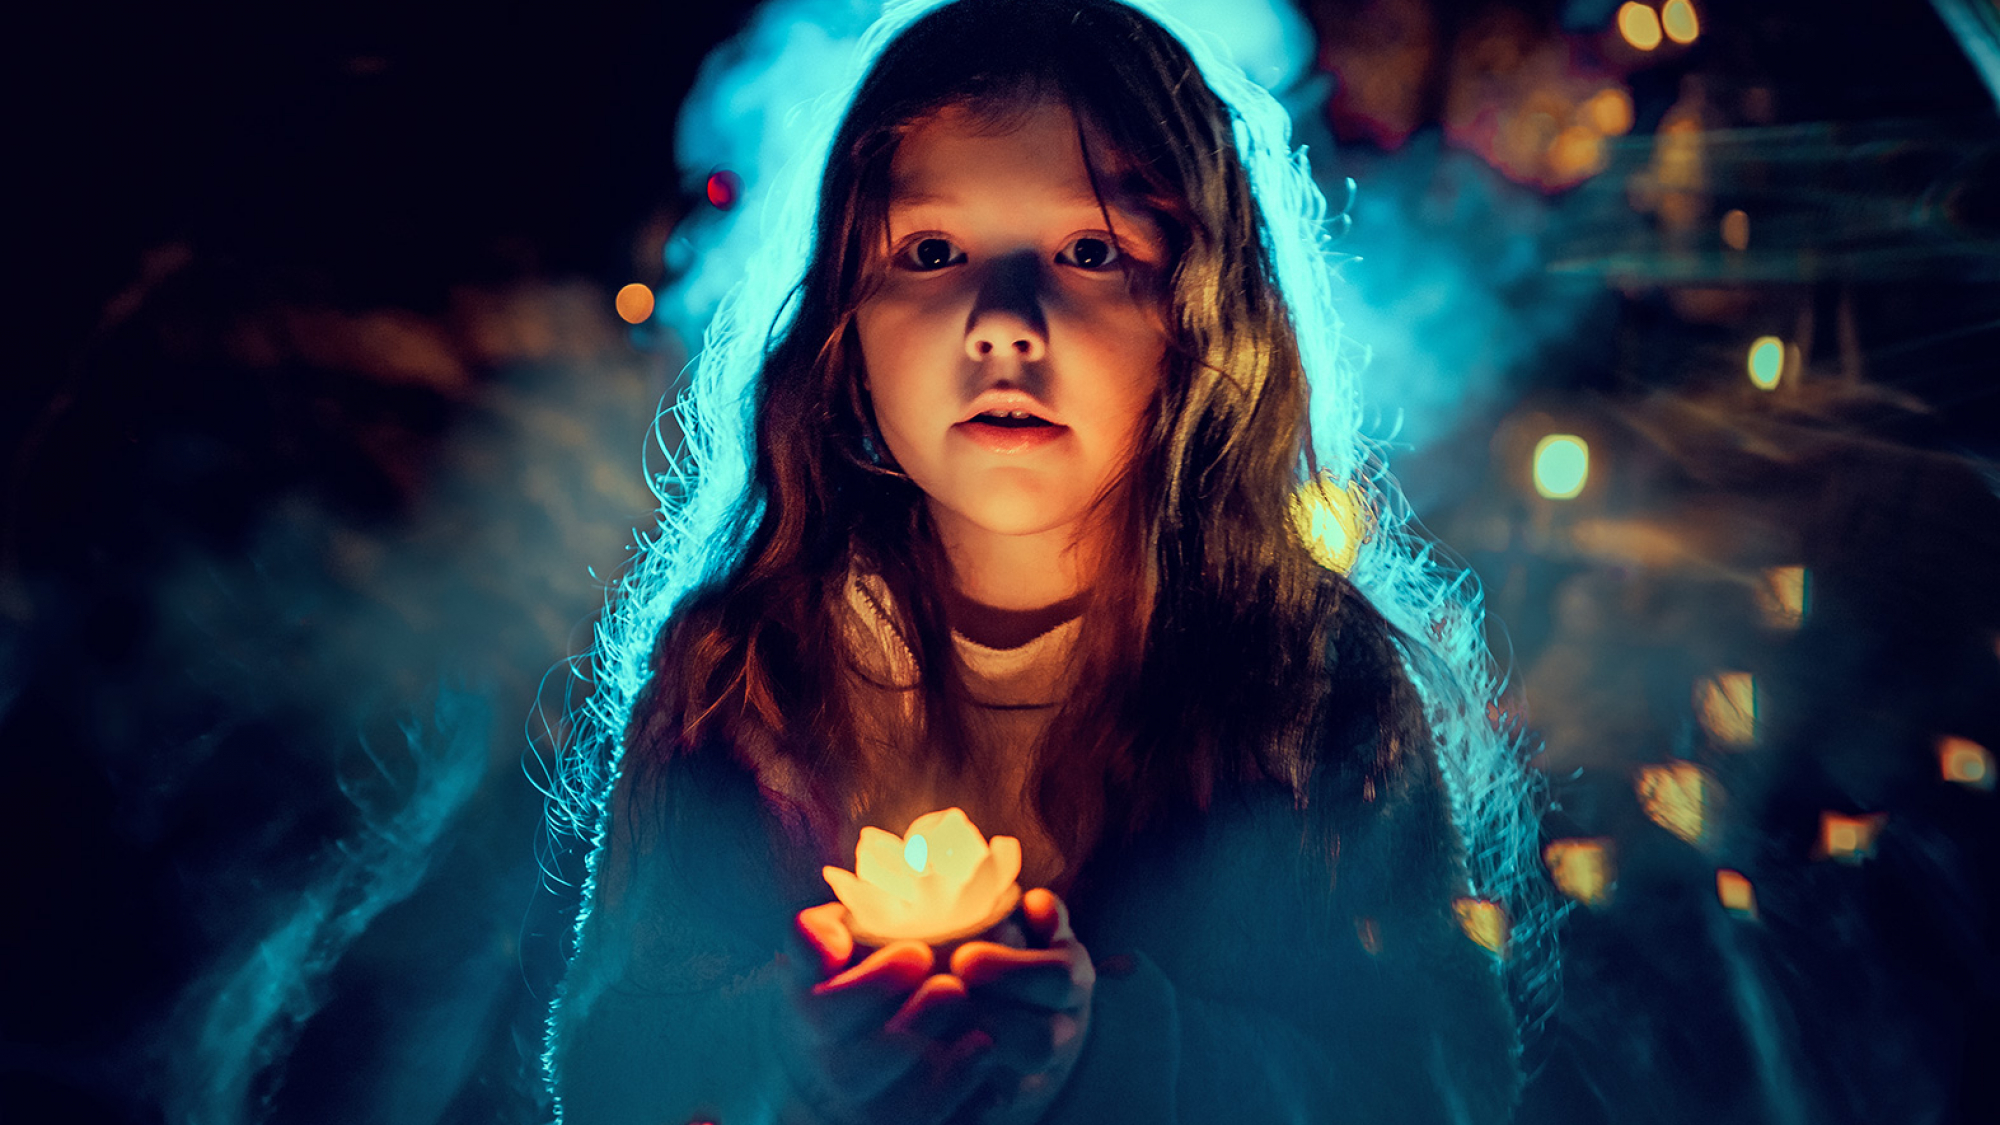 Night portrait photography with candle